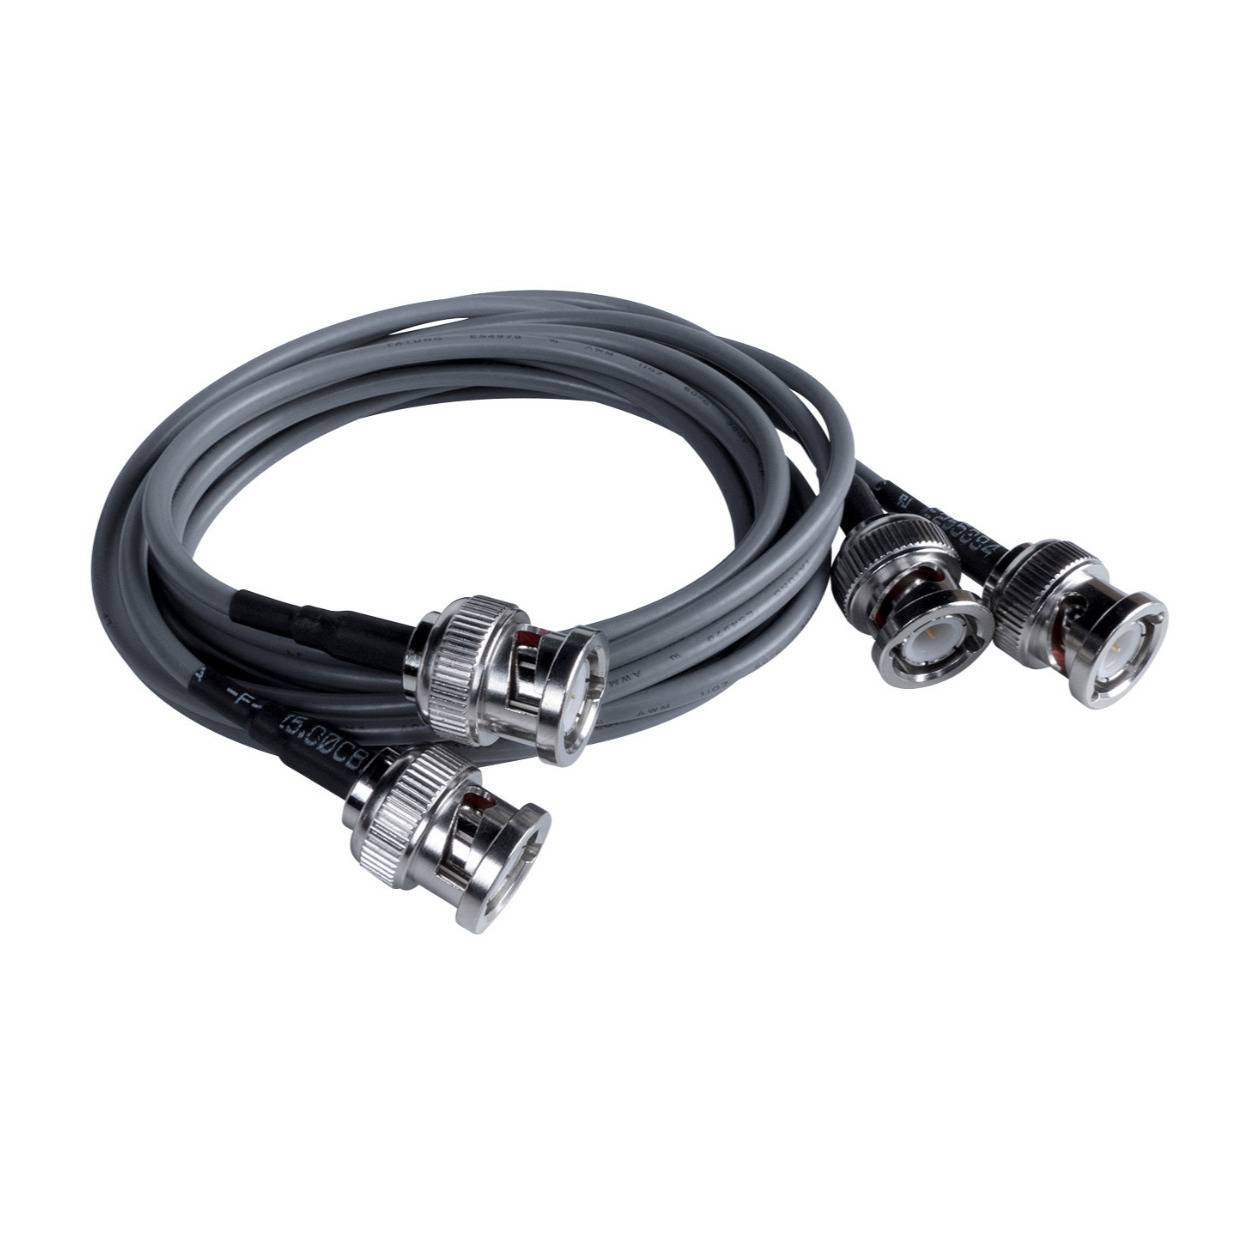 AtlasIED MWBNC48 Wireless Microphone 48-Inch Male To Male BNC Cable (Pair)